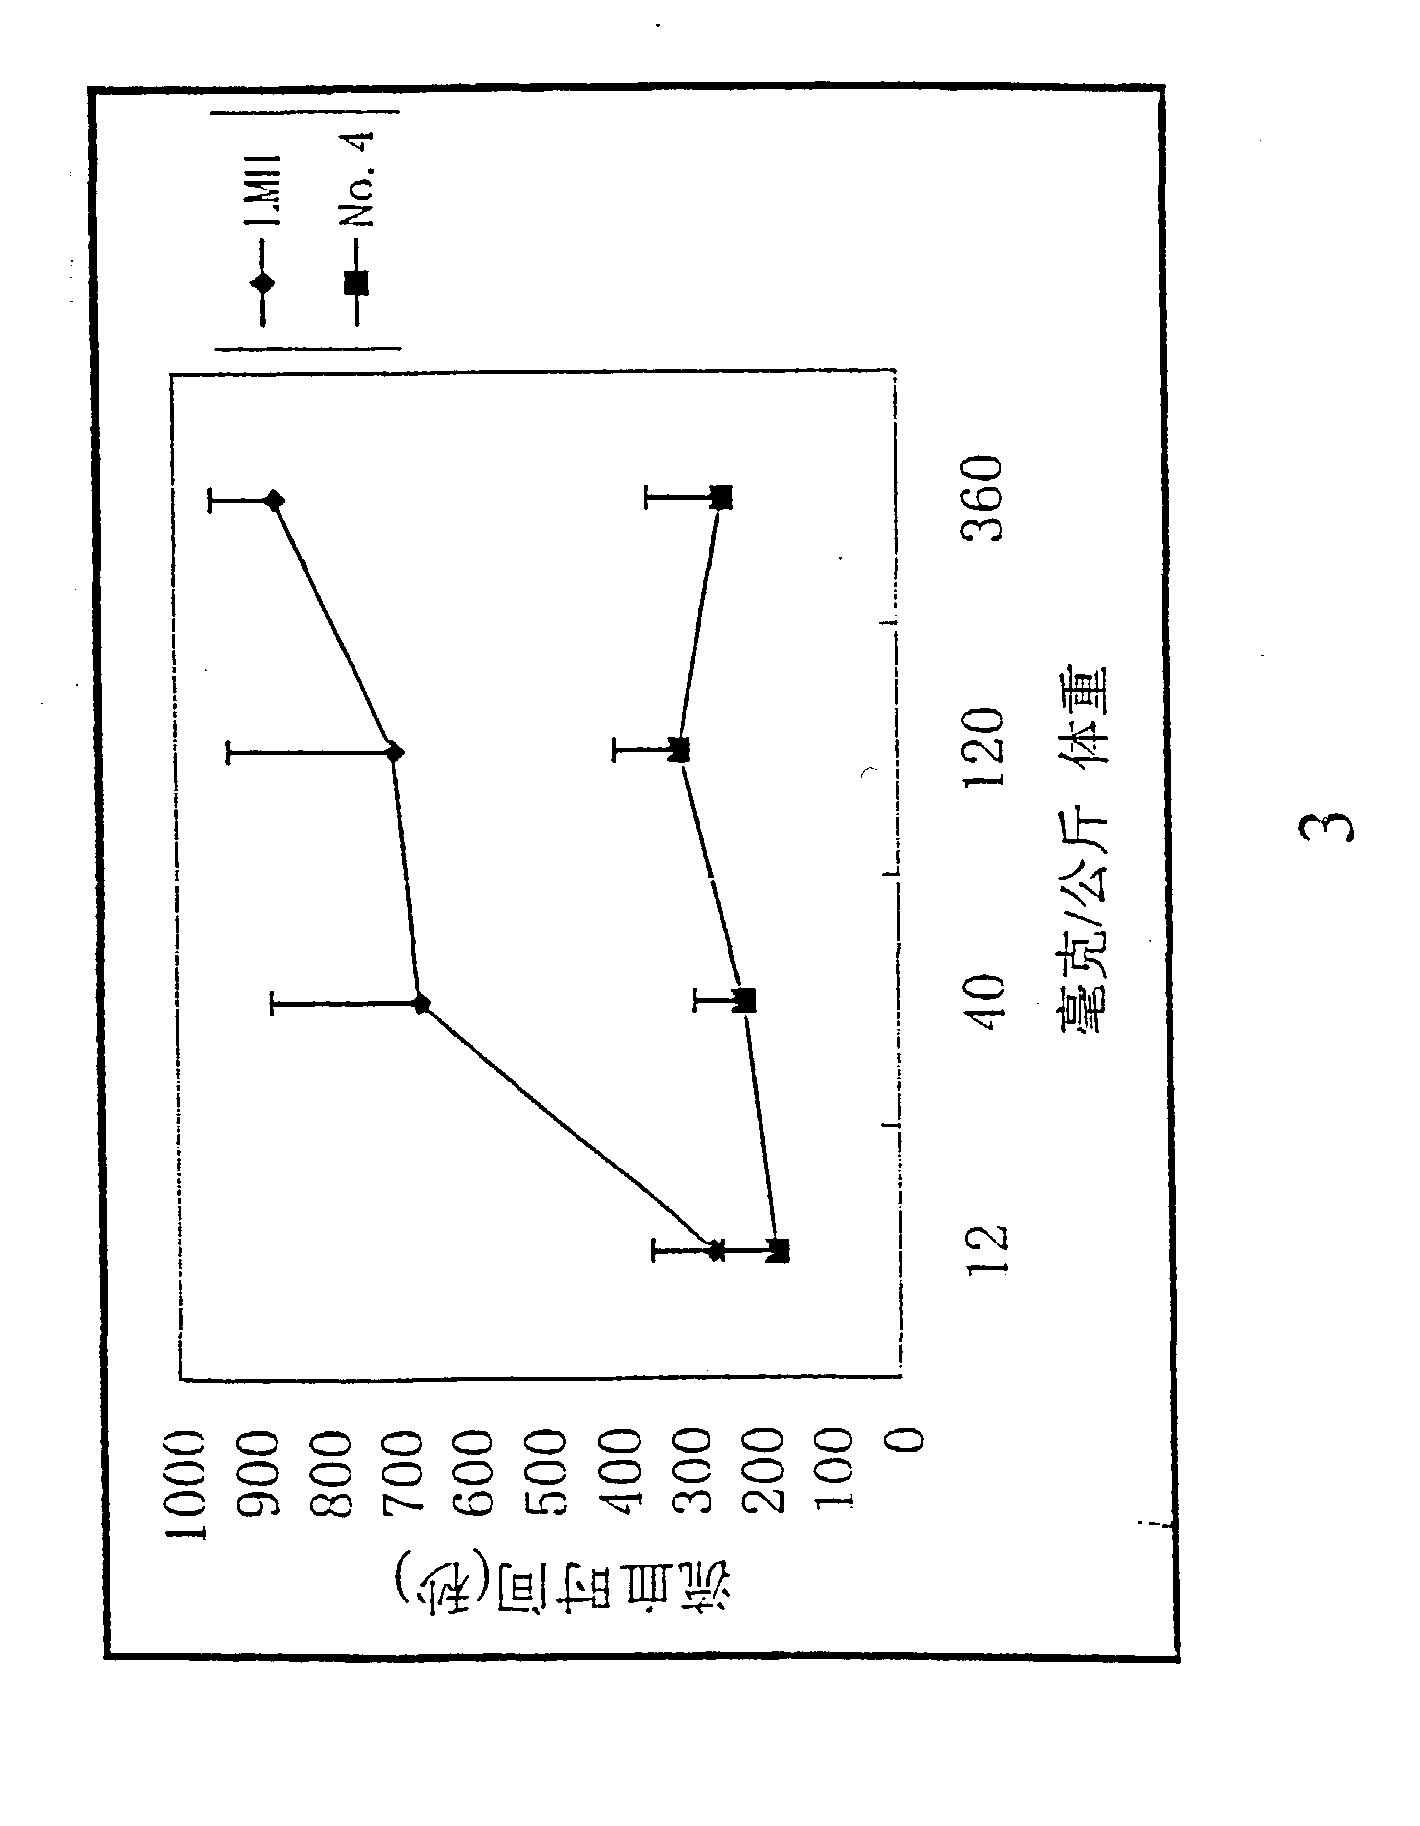 Use of n-desulfated heparin for treating or preventing inflammations